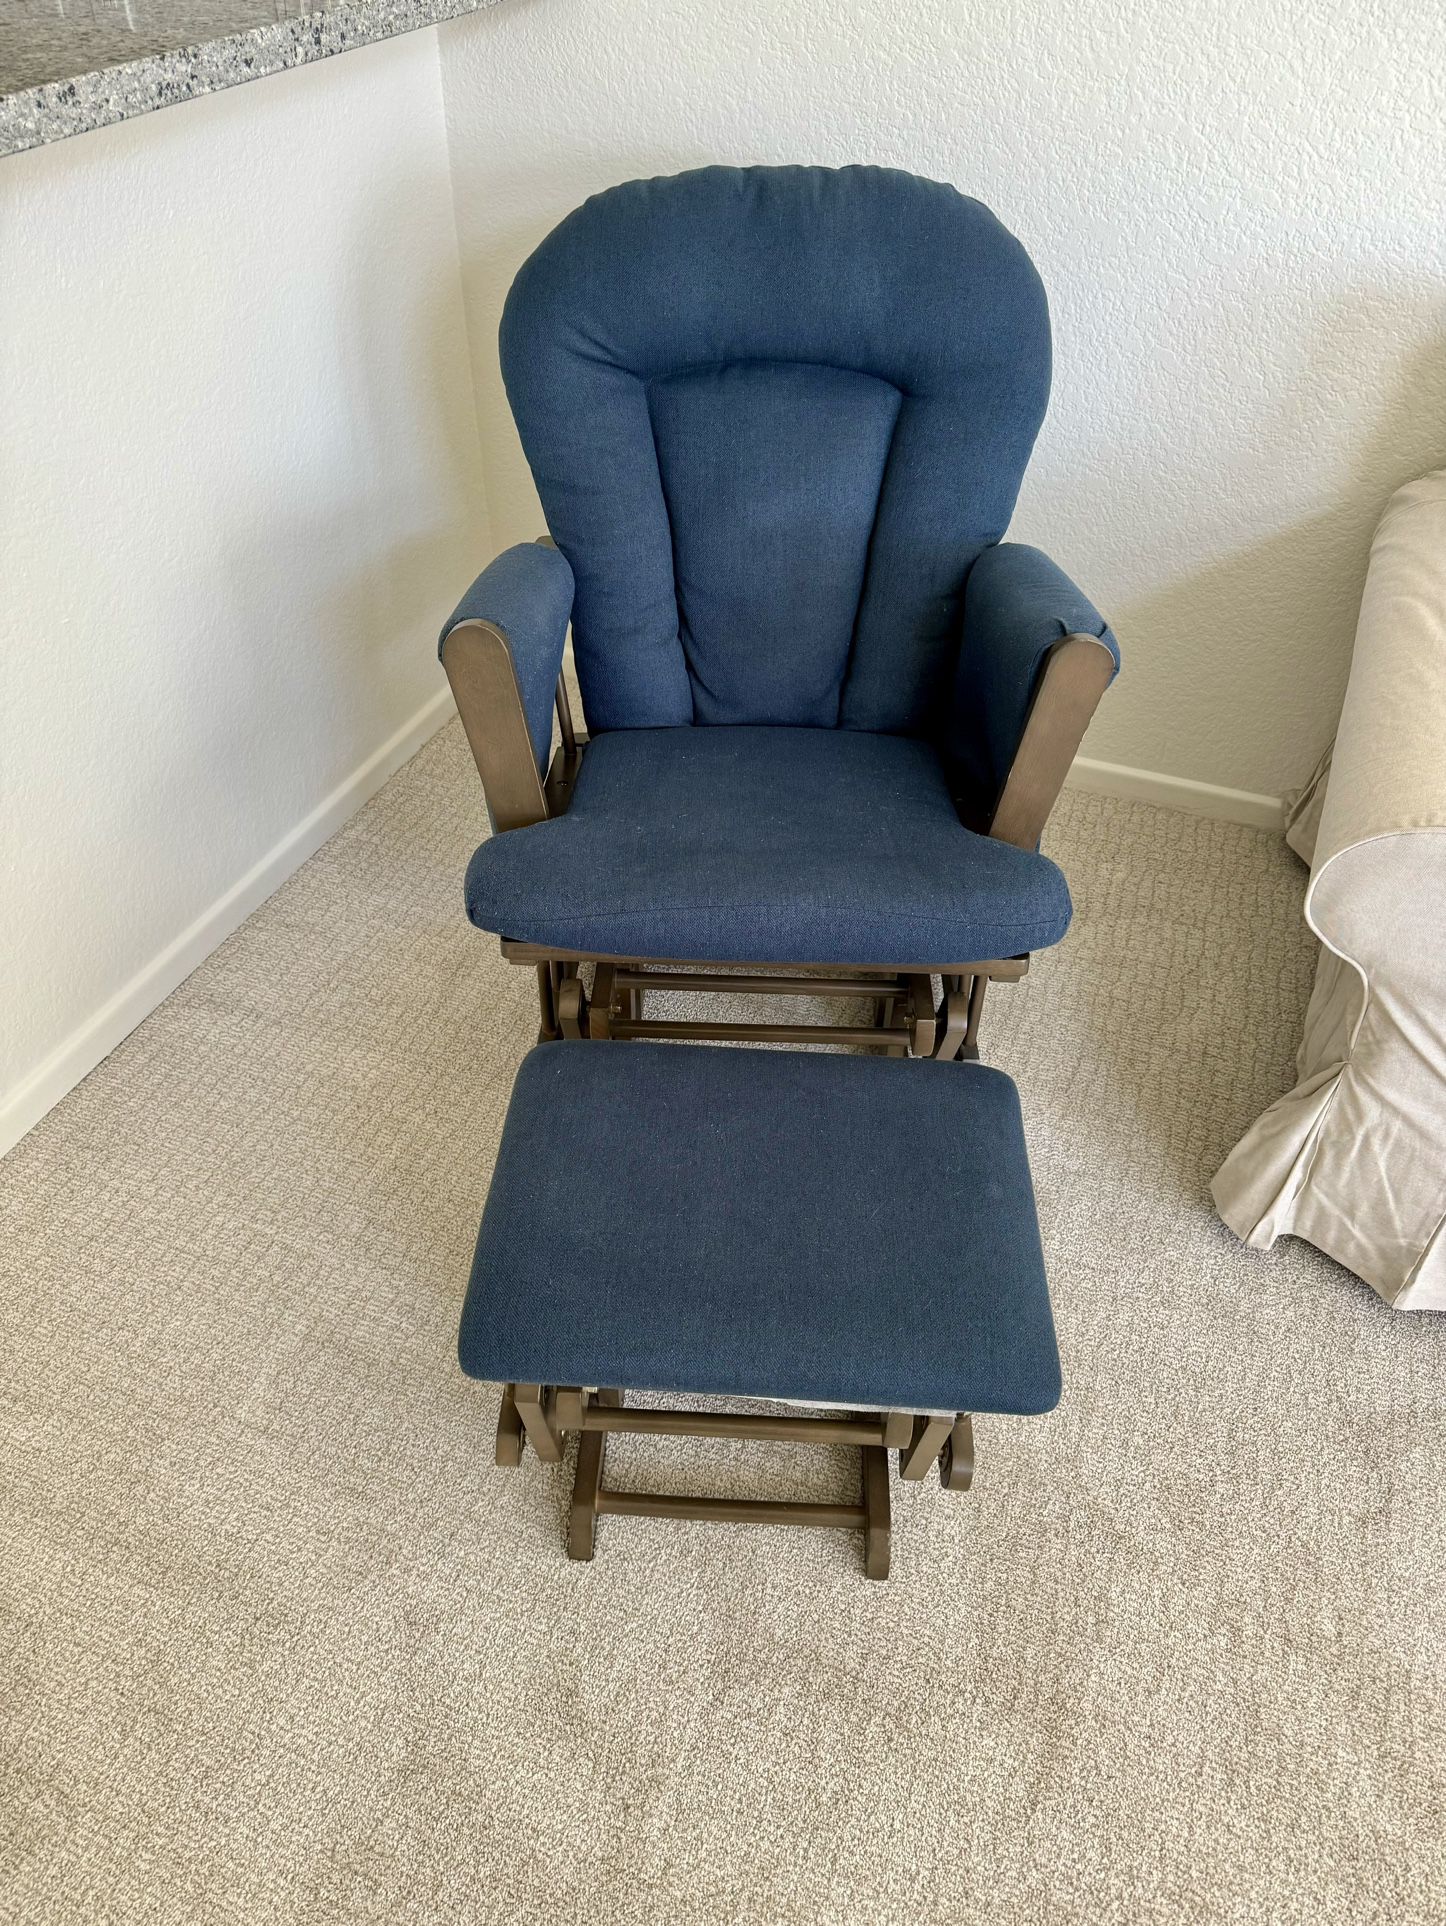 Blue Rocking Chair With Ottoman